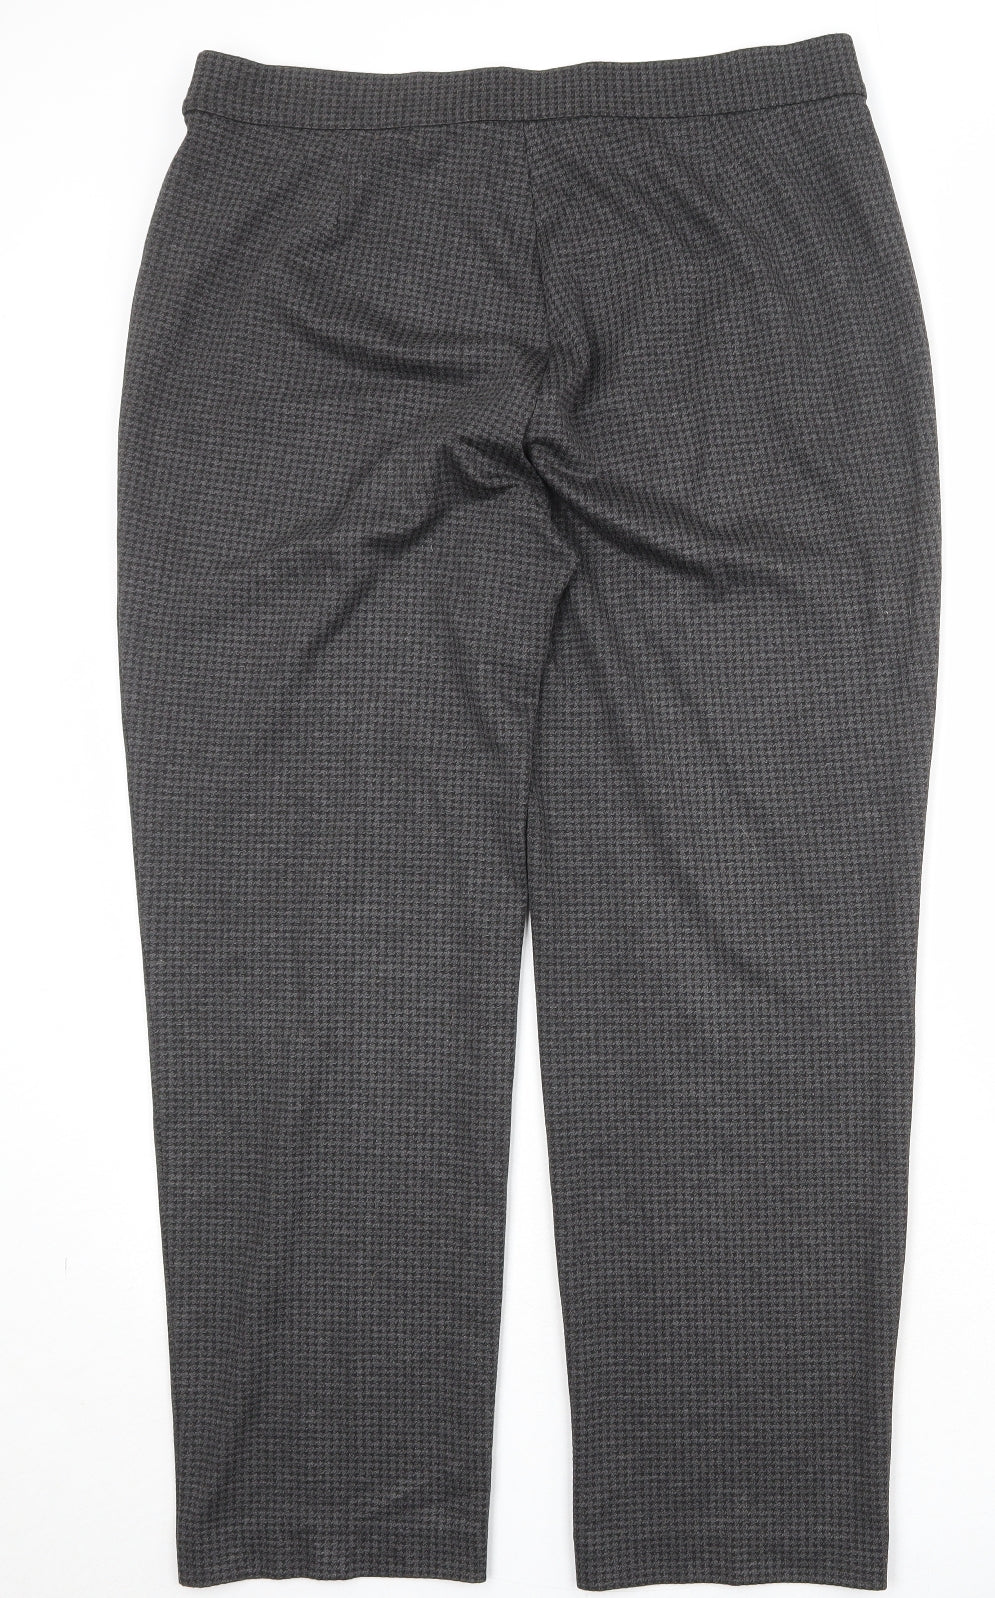 Marks and Spencer Womens Grey Geometric Polyester Carrot Trousers Size 18 Regular